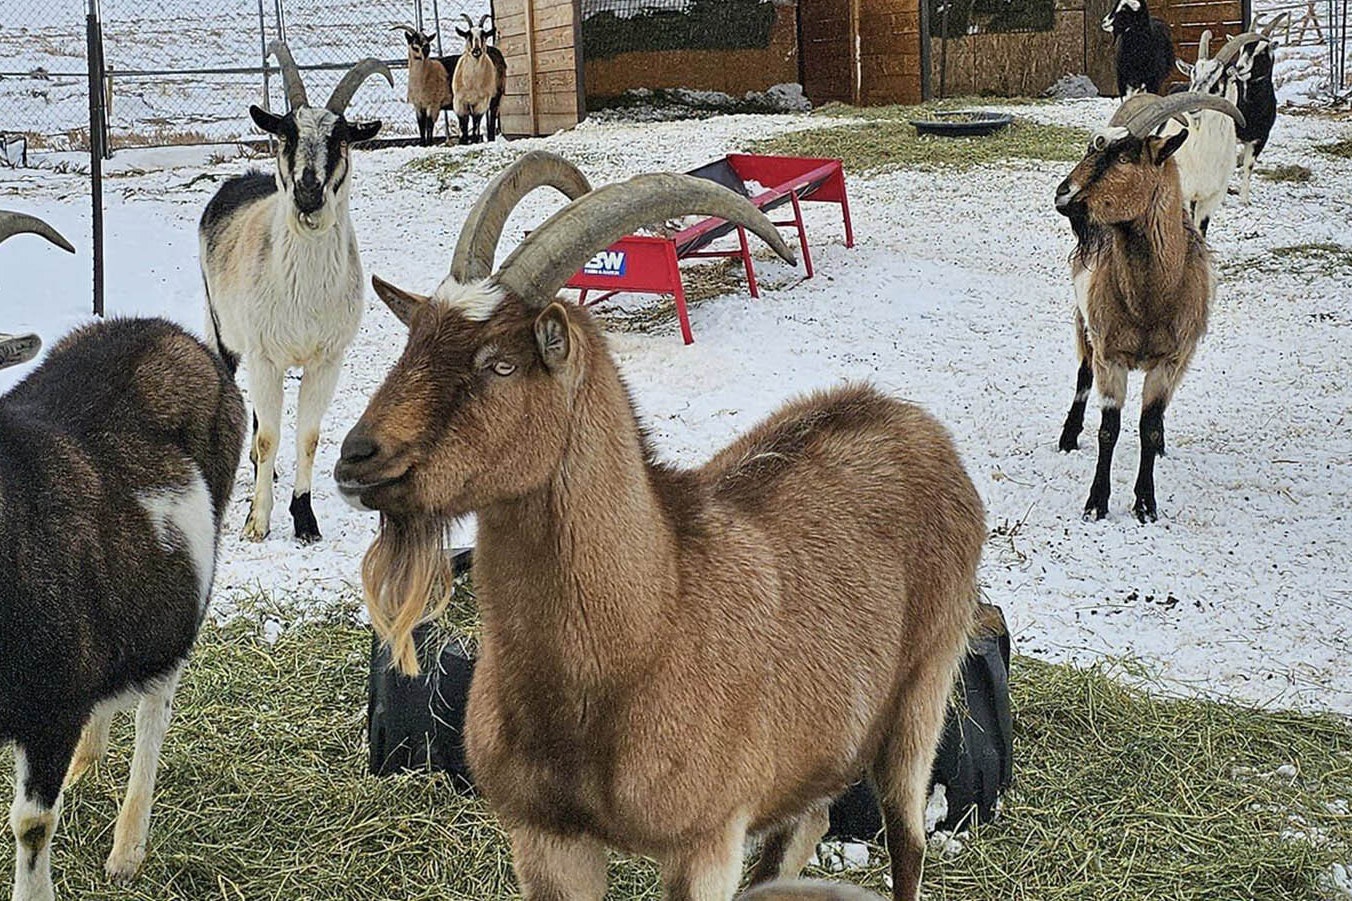 Pack goats can be a godsend for hunters and other backcountry enthusiasts.